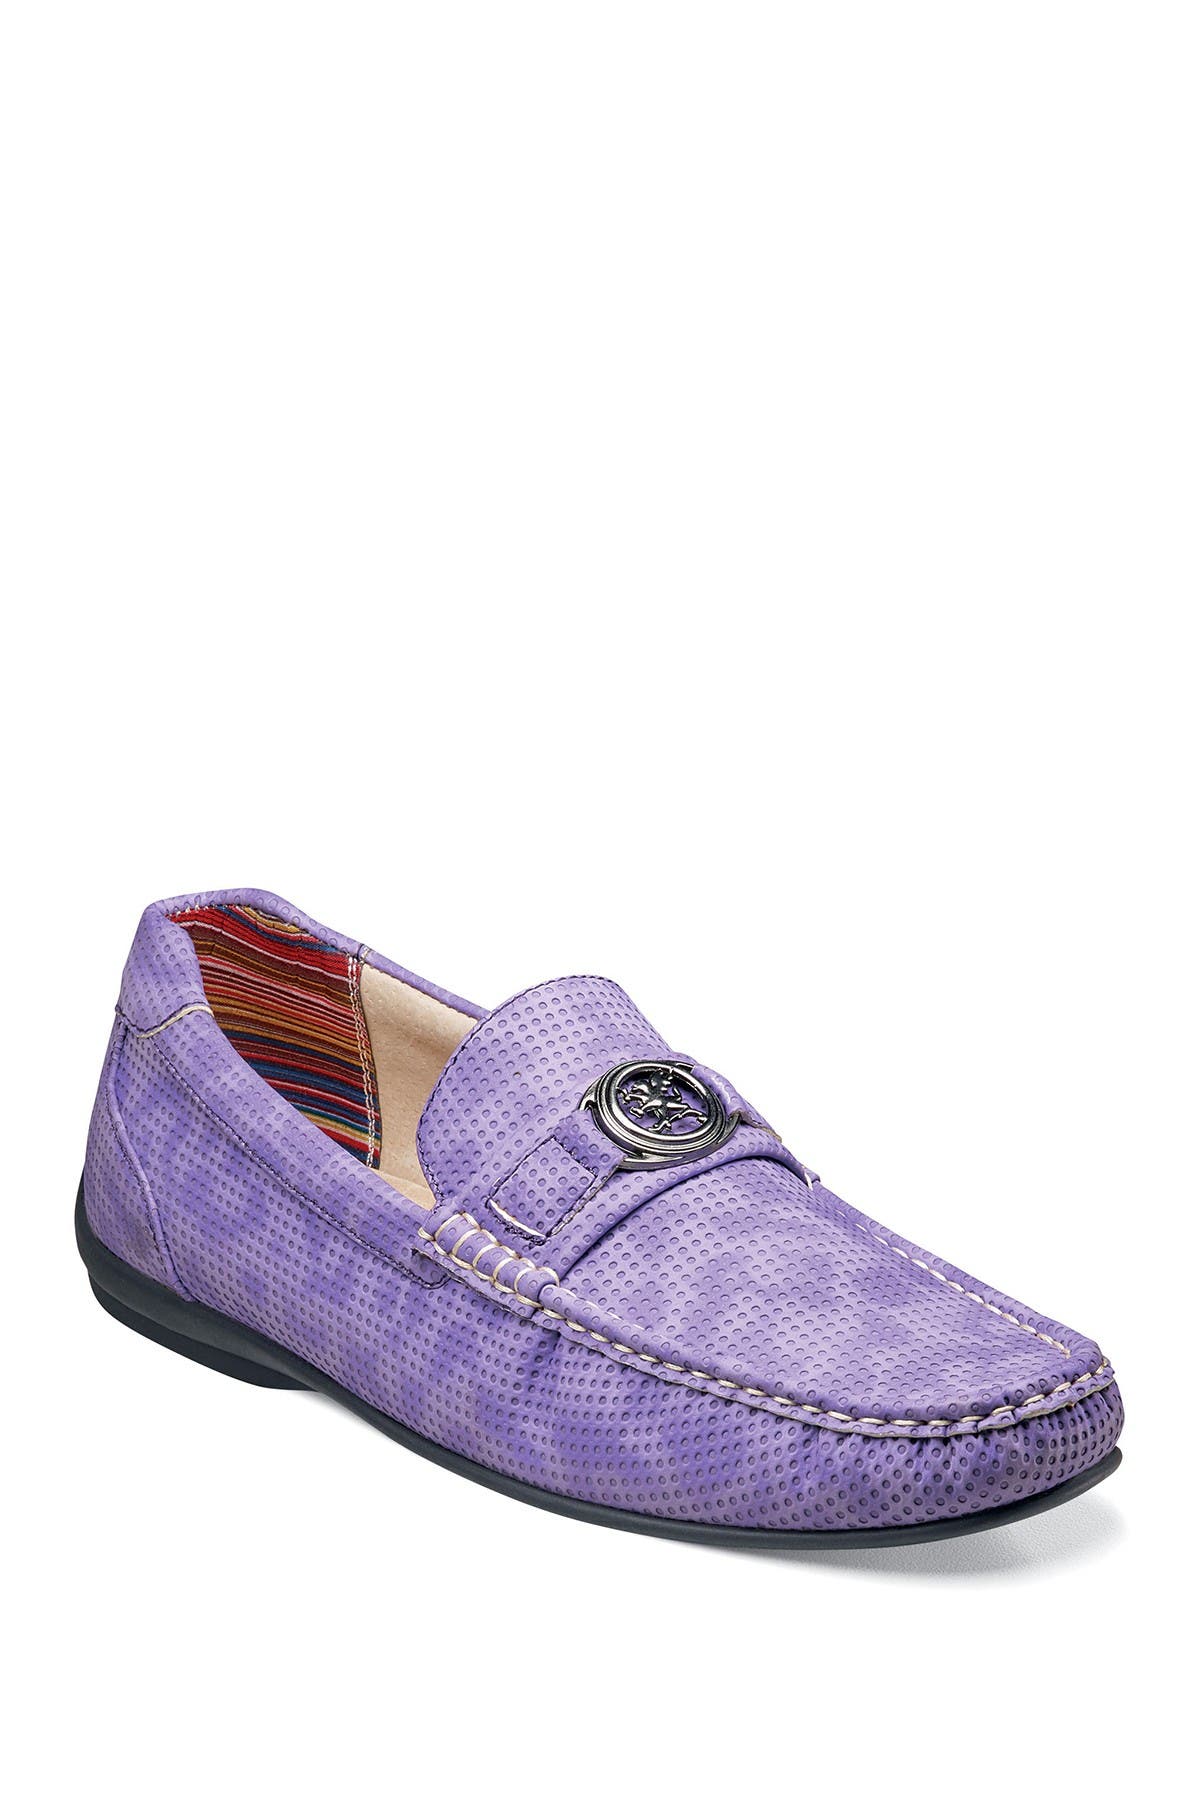 stacy adams slip on loafers